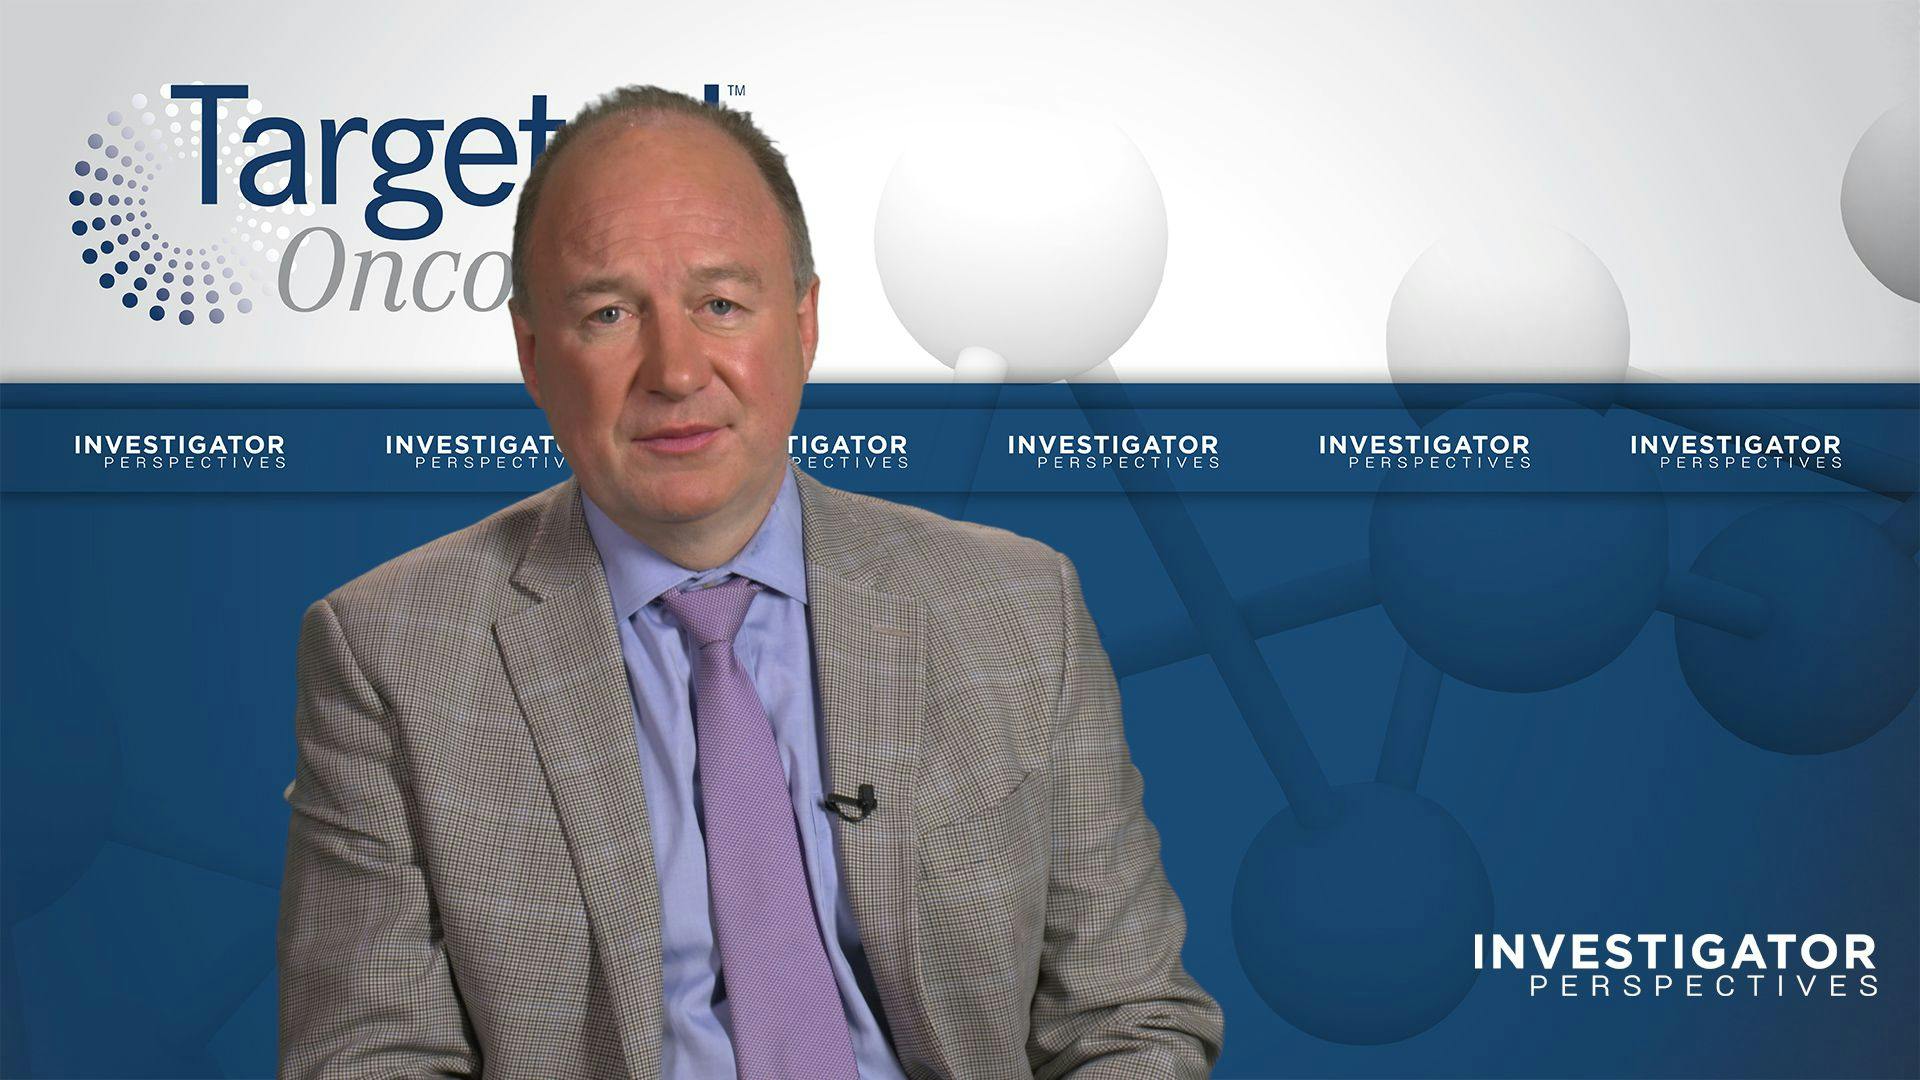 Targeting CD38 in Relapsed/Refractory Multiple Myeloma